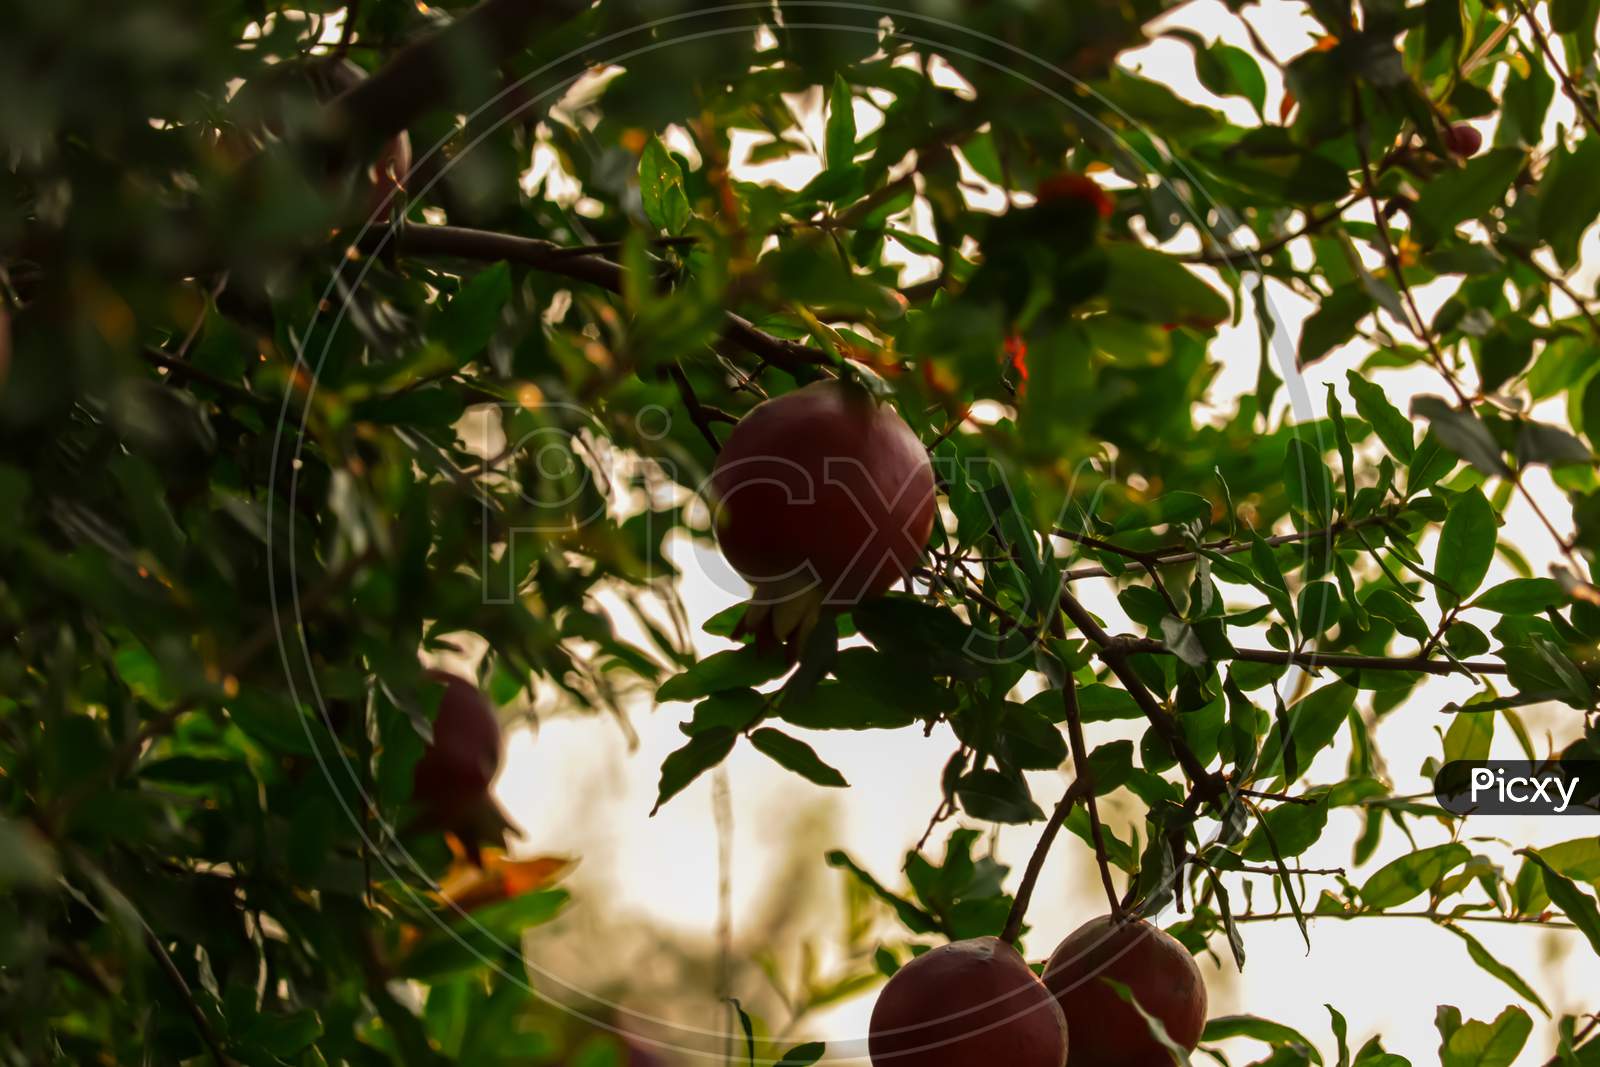 Miniature Pomegranate - Punica Granatum - Tropical Fruit Growing On A Tree,Morning Sunlight Pomegranate Fruit Scene,Hd Footage With Selective Focus,Harvesting,Red Ripe Pomegranate Fruit